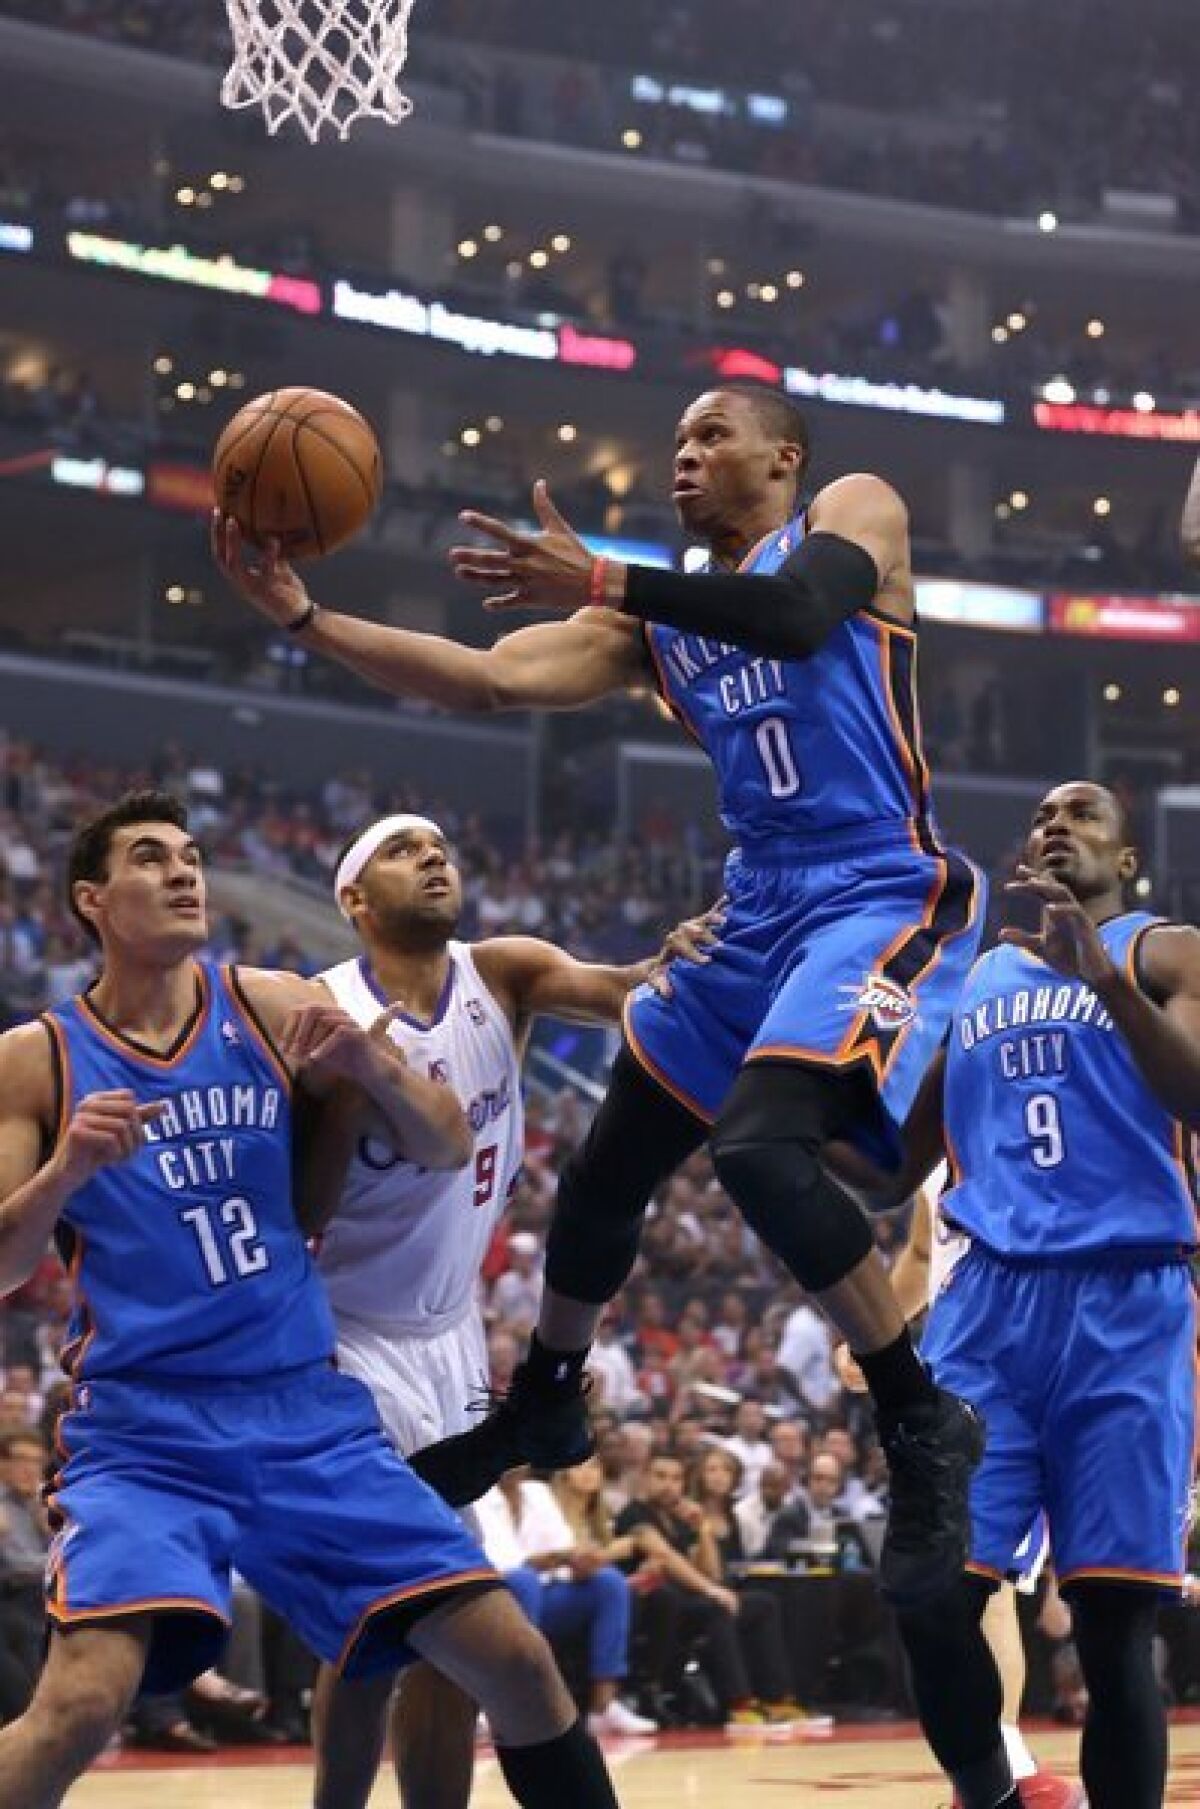 Russell Westbrook goes for a layup against the Clippers at Staples Center.